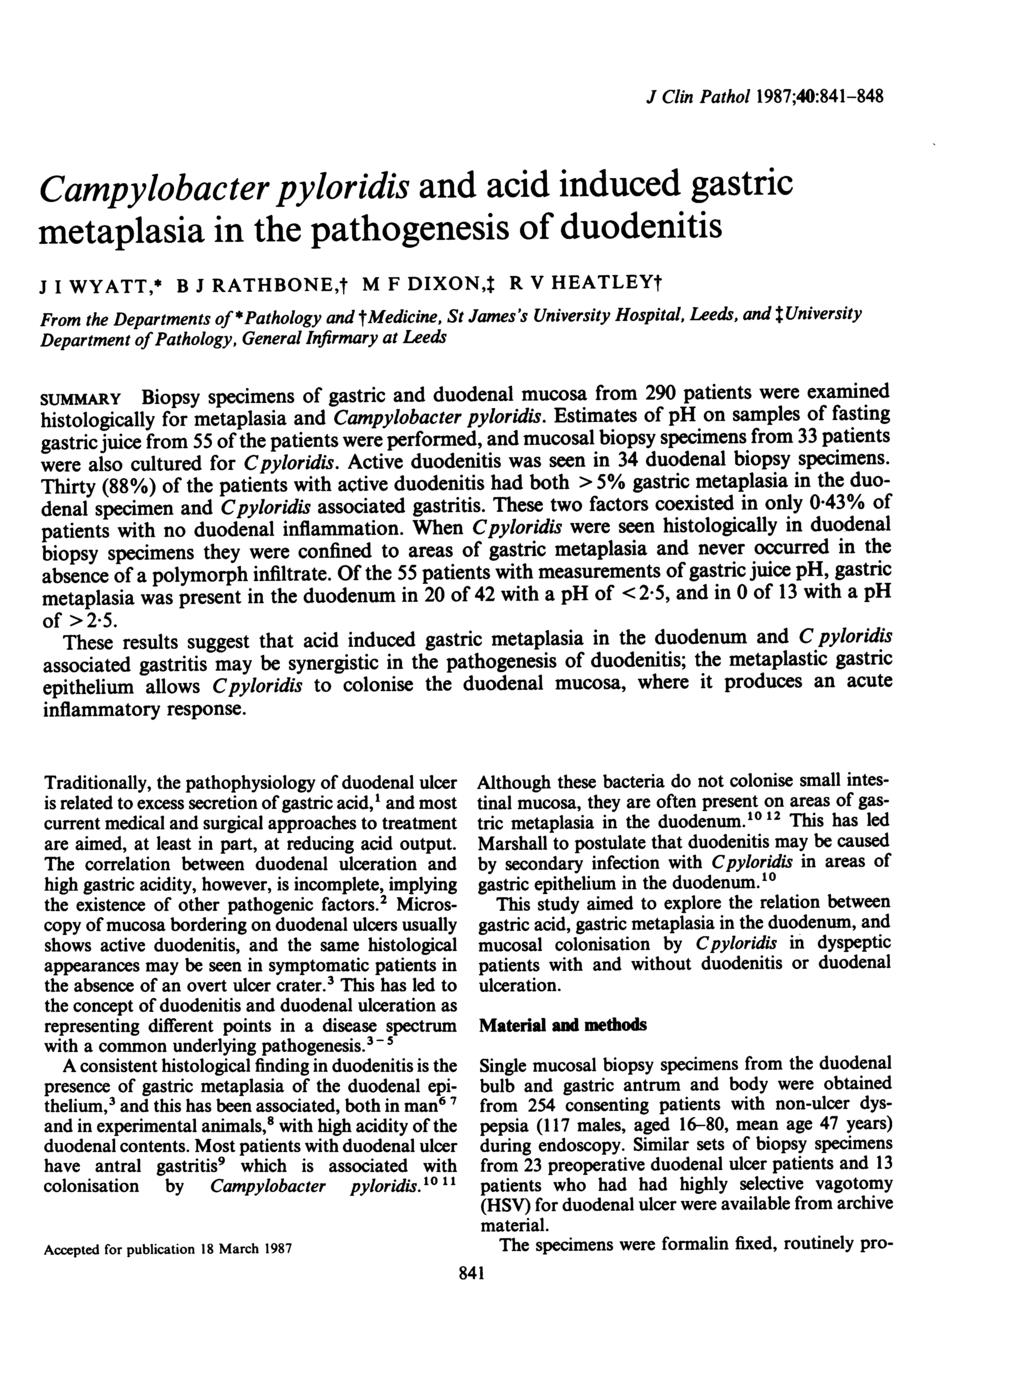 J Clin Pathol 1987;40:841-848 Campylobacter pyloridis and acid induced gastric metaplasia in the pathogenesis of duodenitis J I WYATT,* B J RATHBONE,t M F DIXON,: R V HEATLEYt From the Departments of